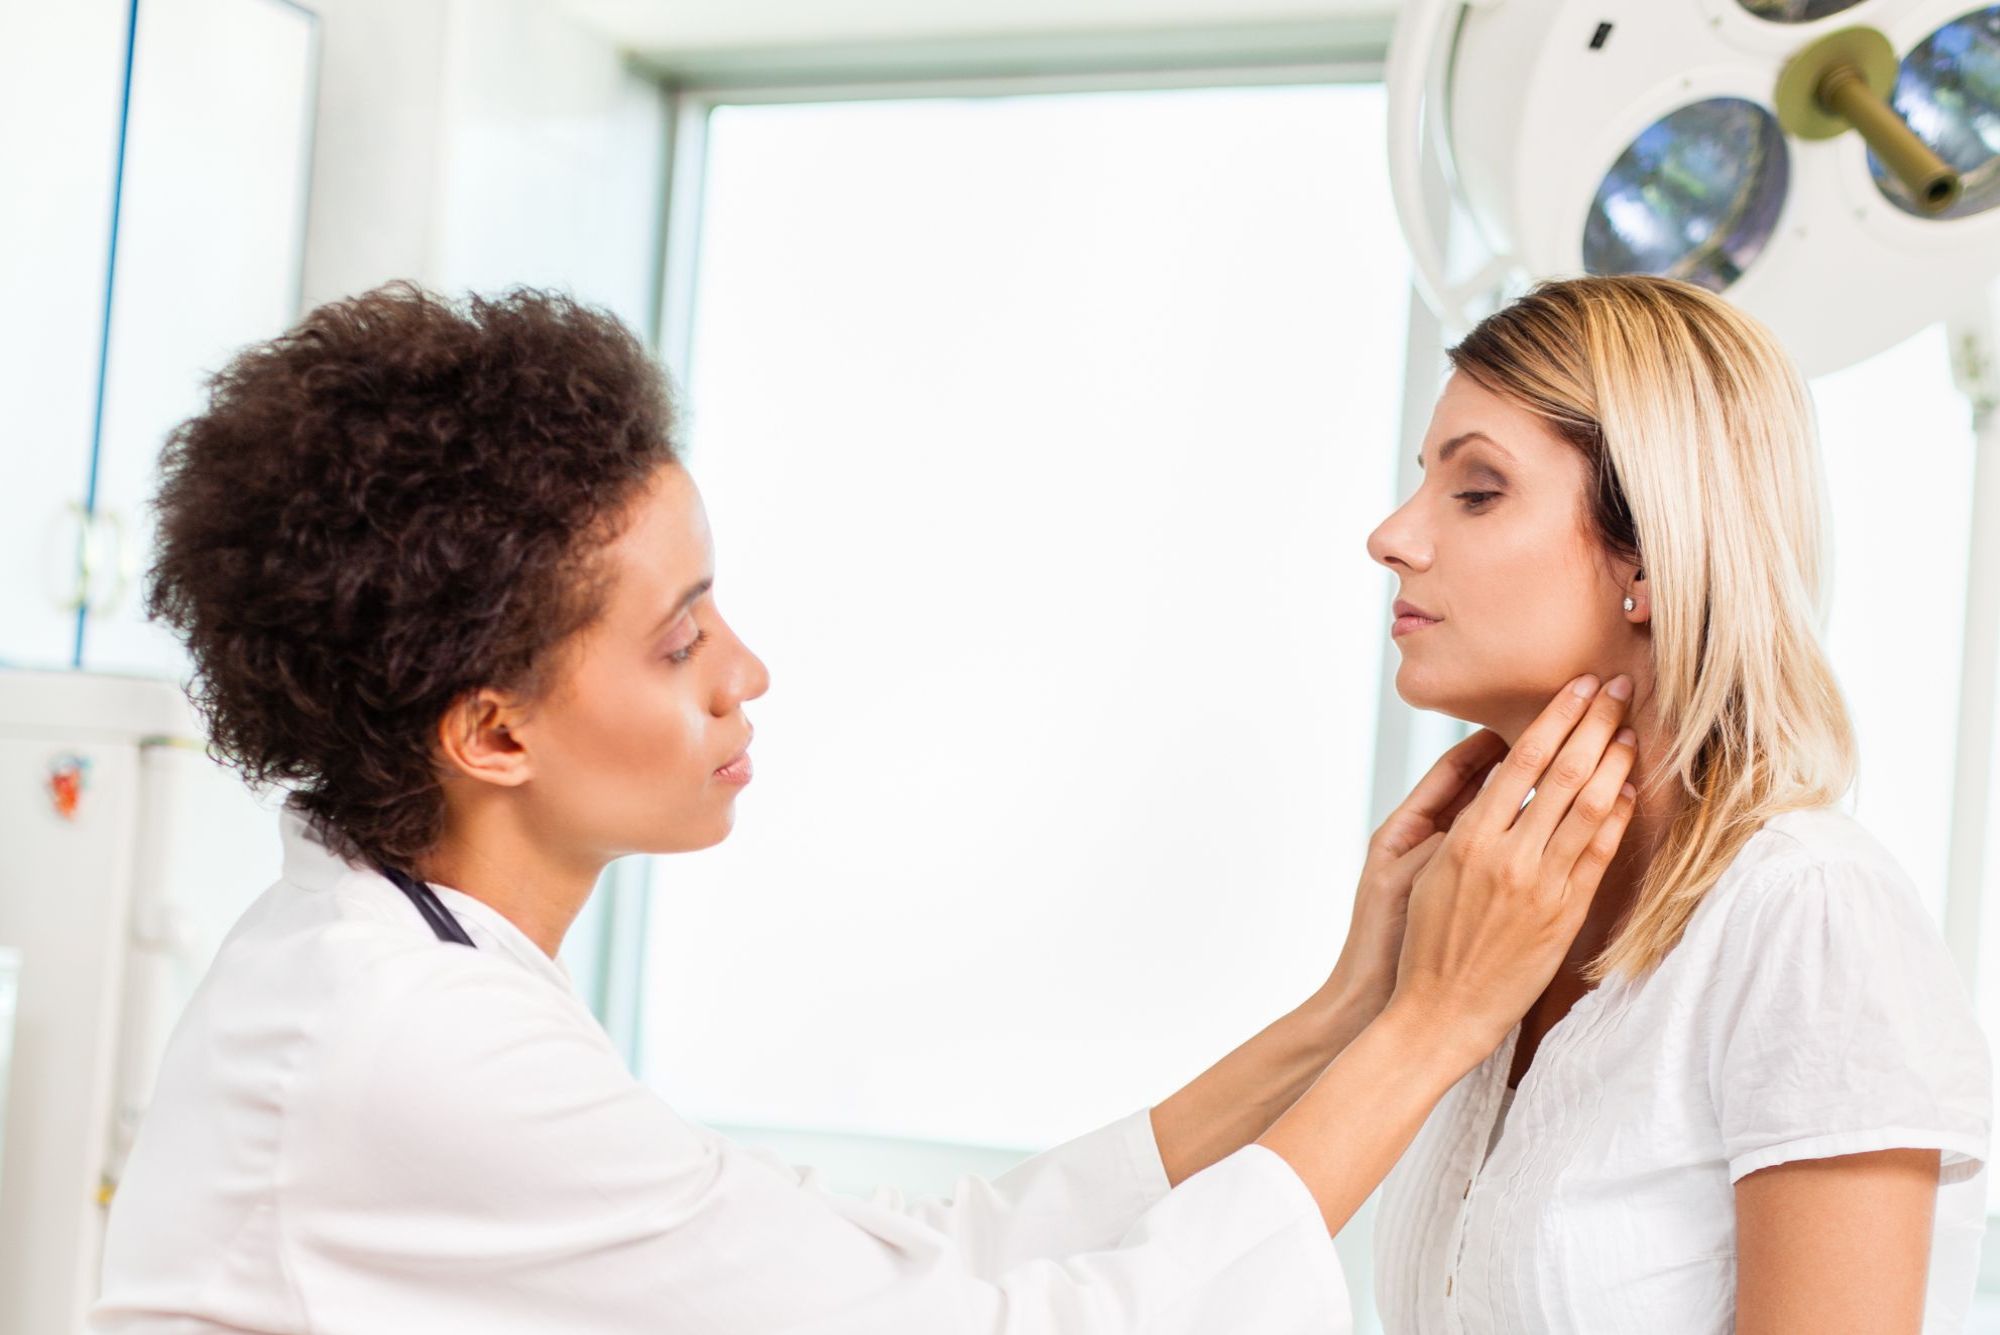 A physician examines a patient's thyroid to see what type of thyroidectomy she needs.